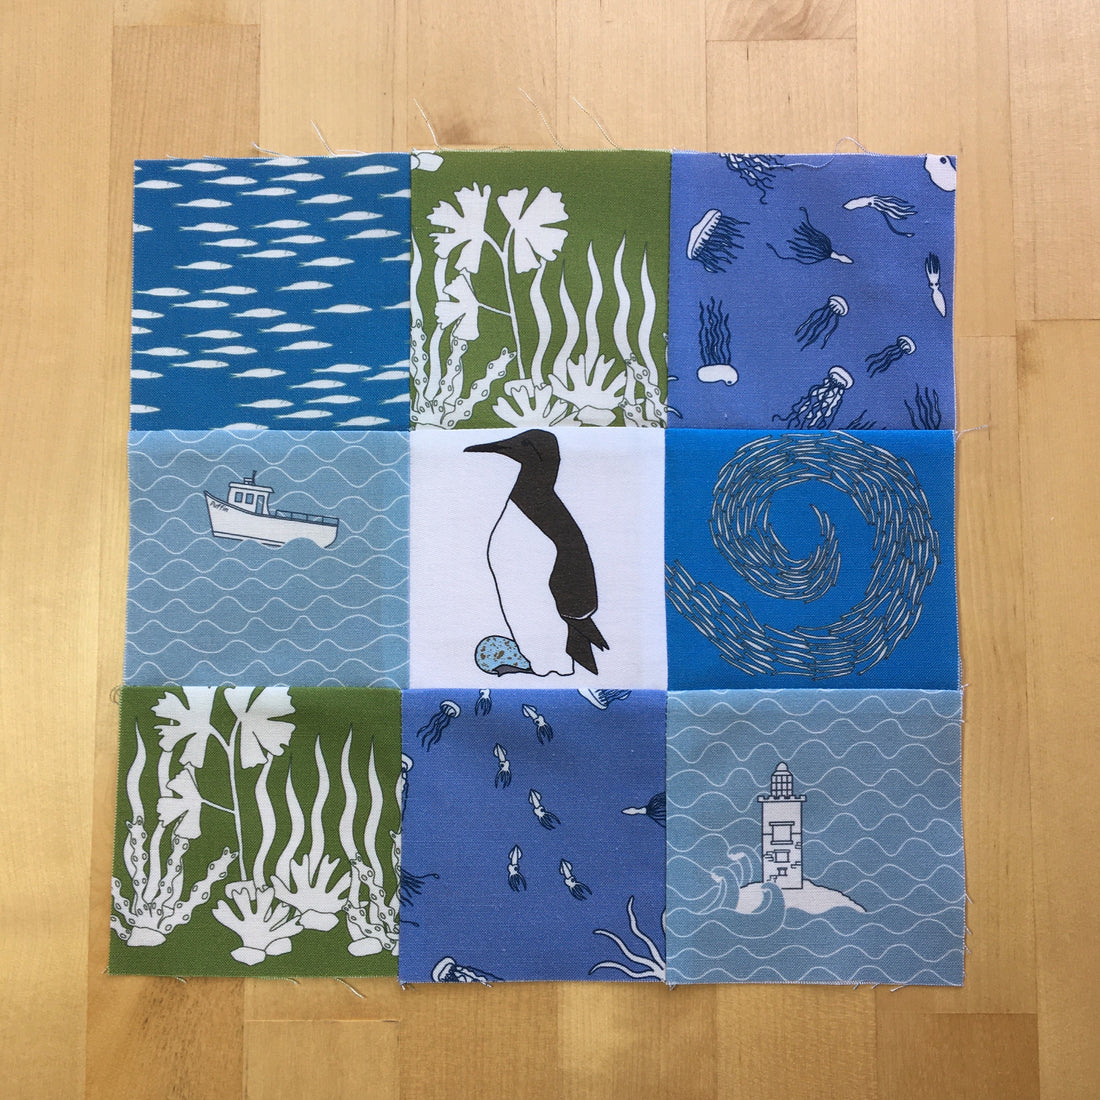 Patchwork and quilting basics 1 – Cutting and sewing pieces together